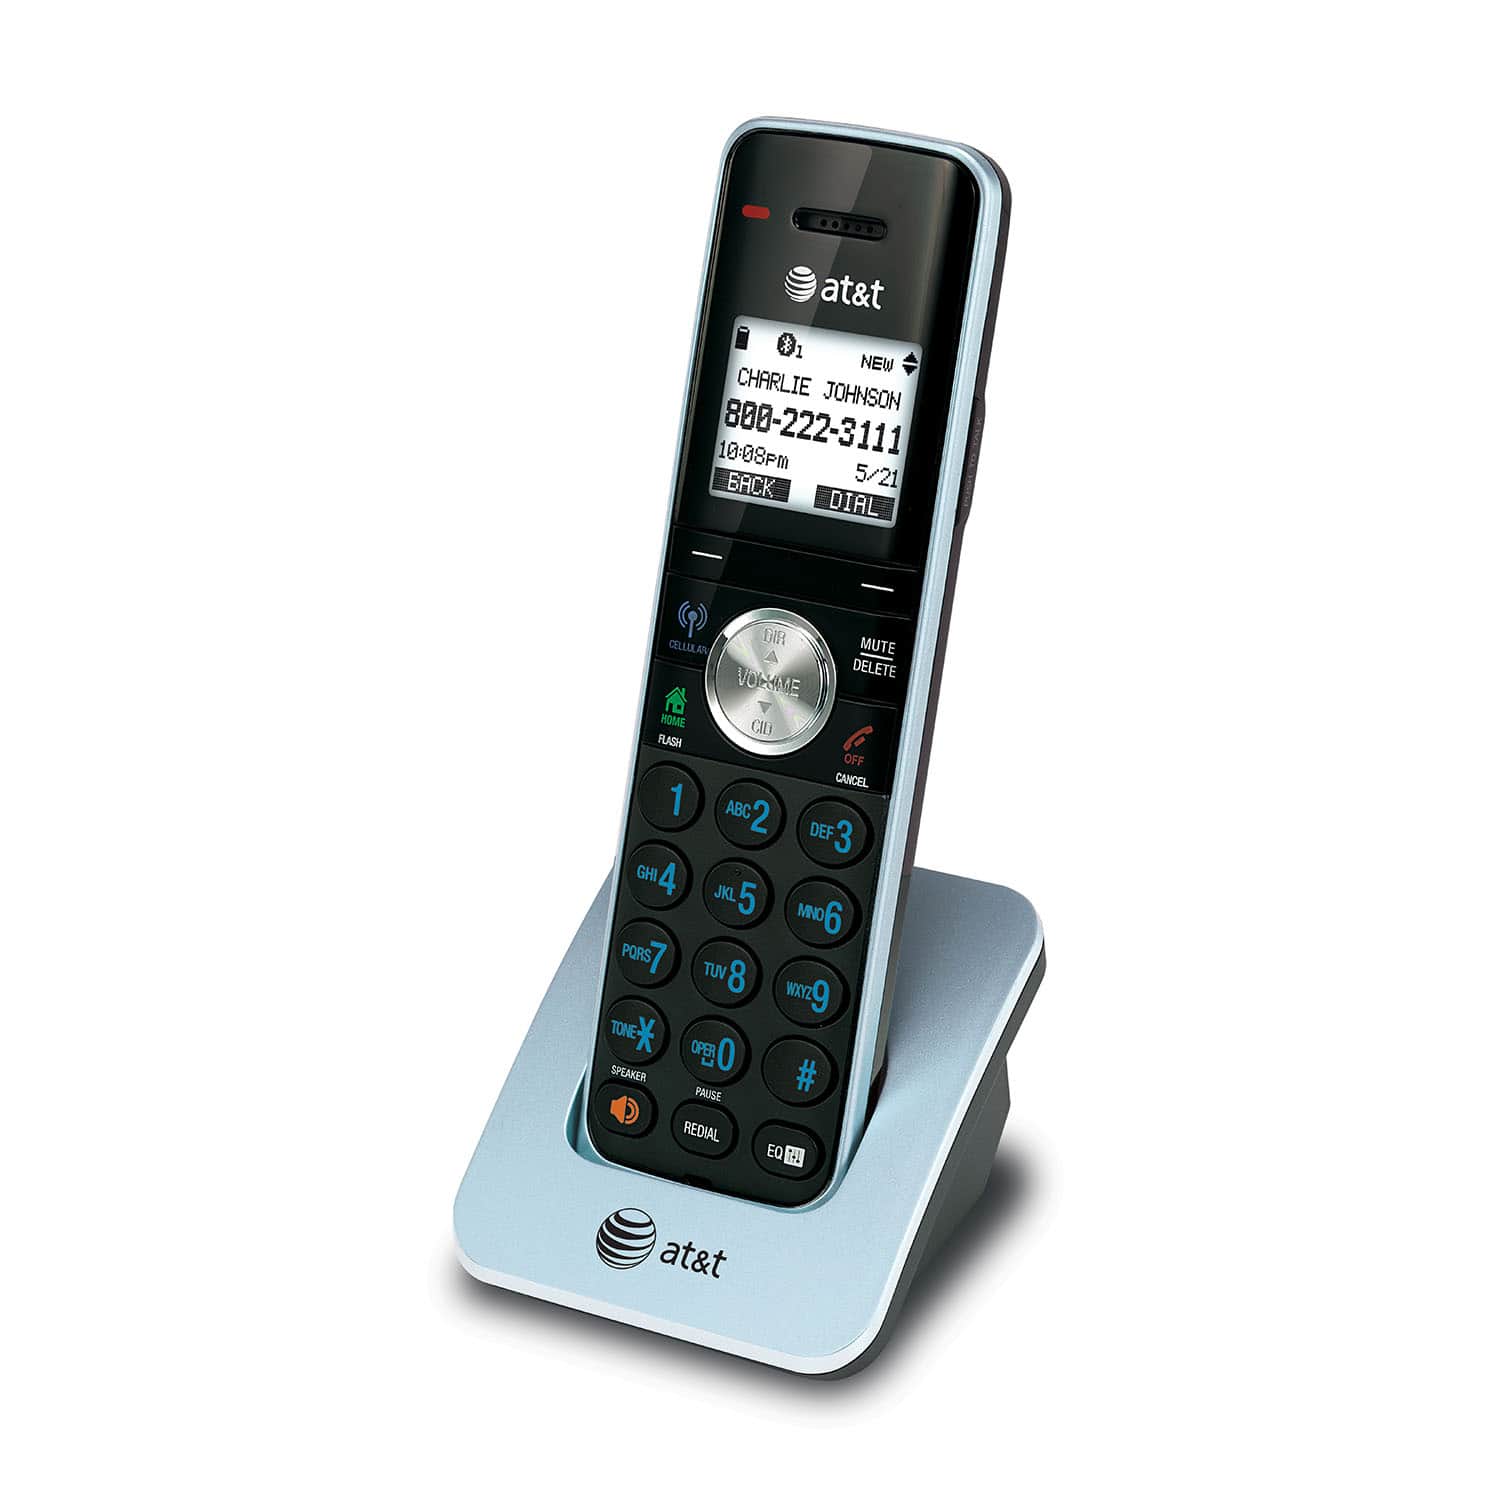 5 handset Connect to Cell™ answering system with caller ID/call waiting - view 4